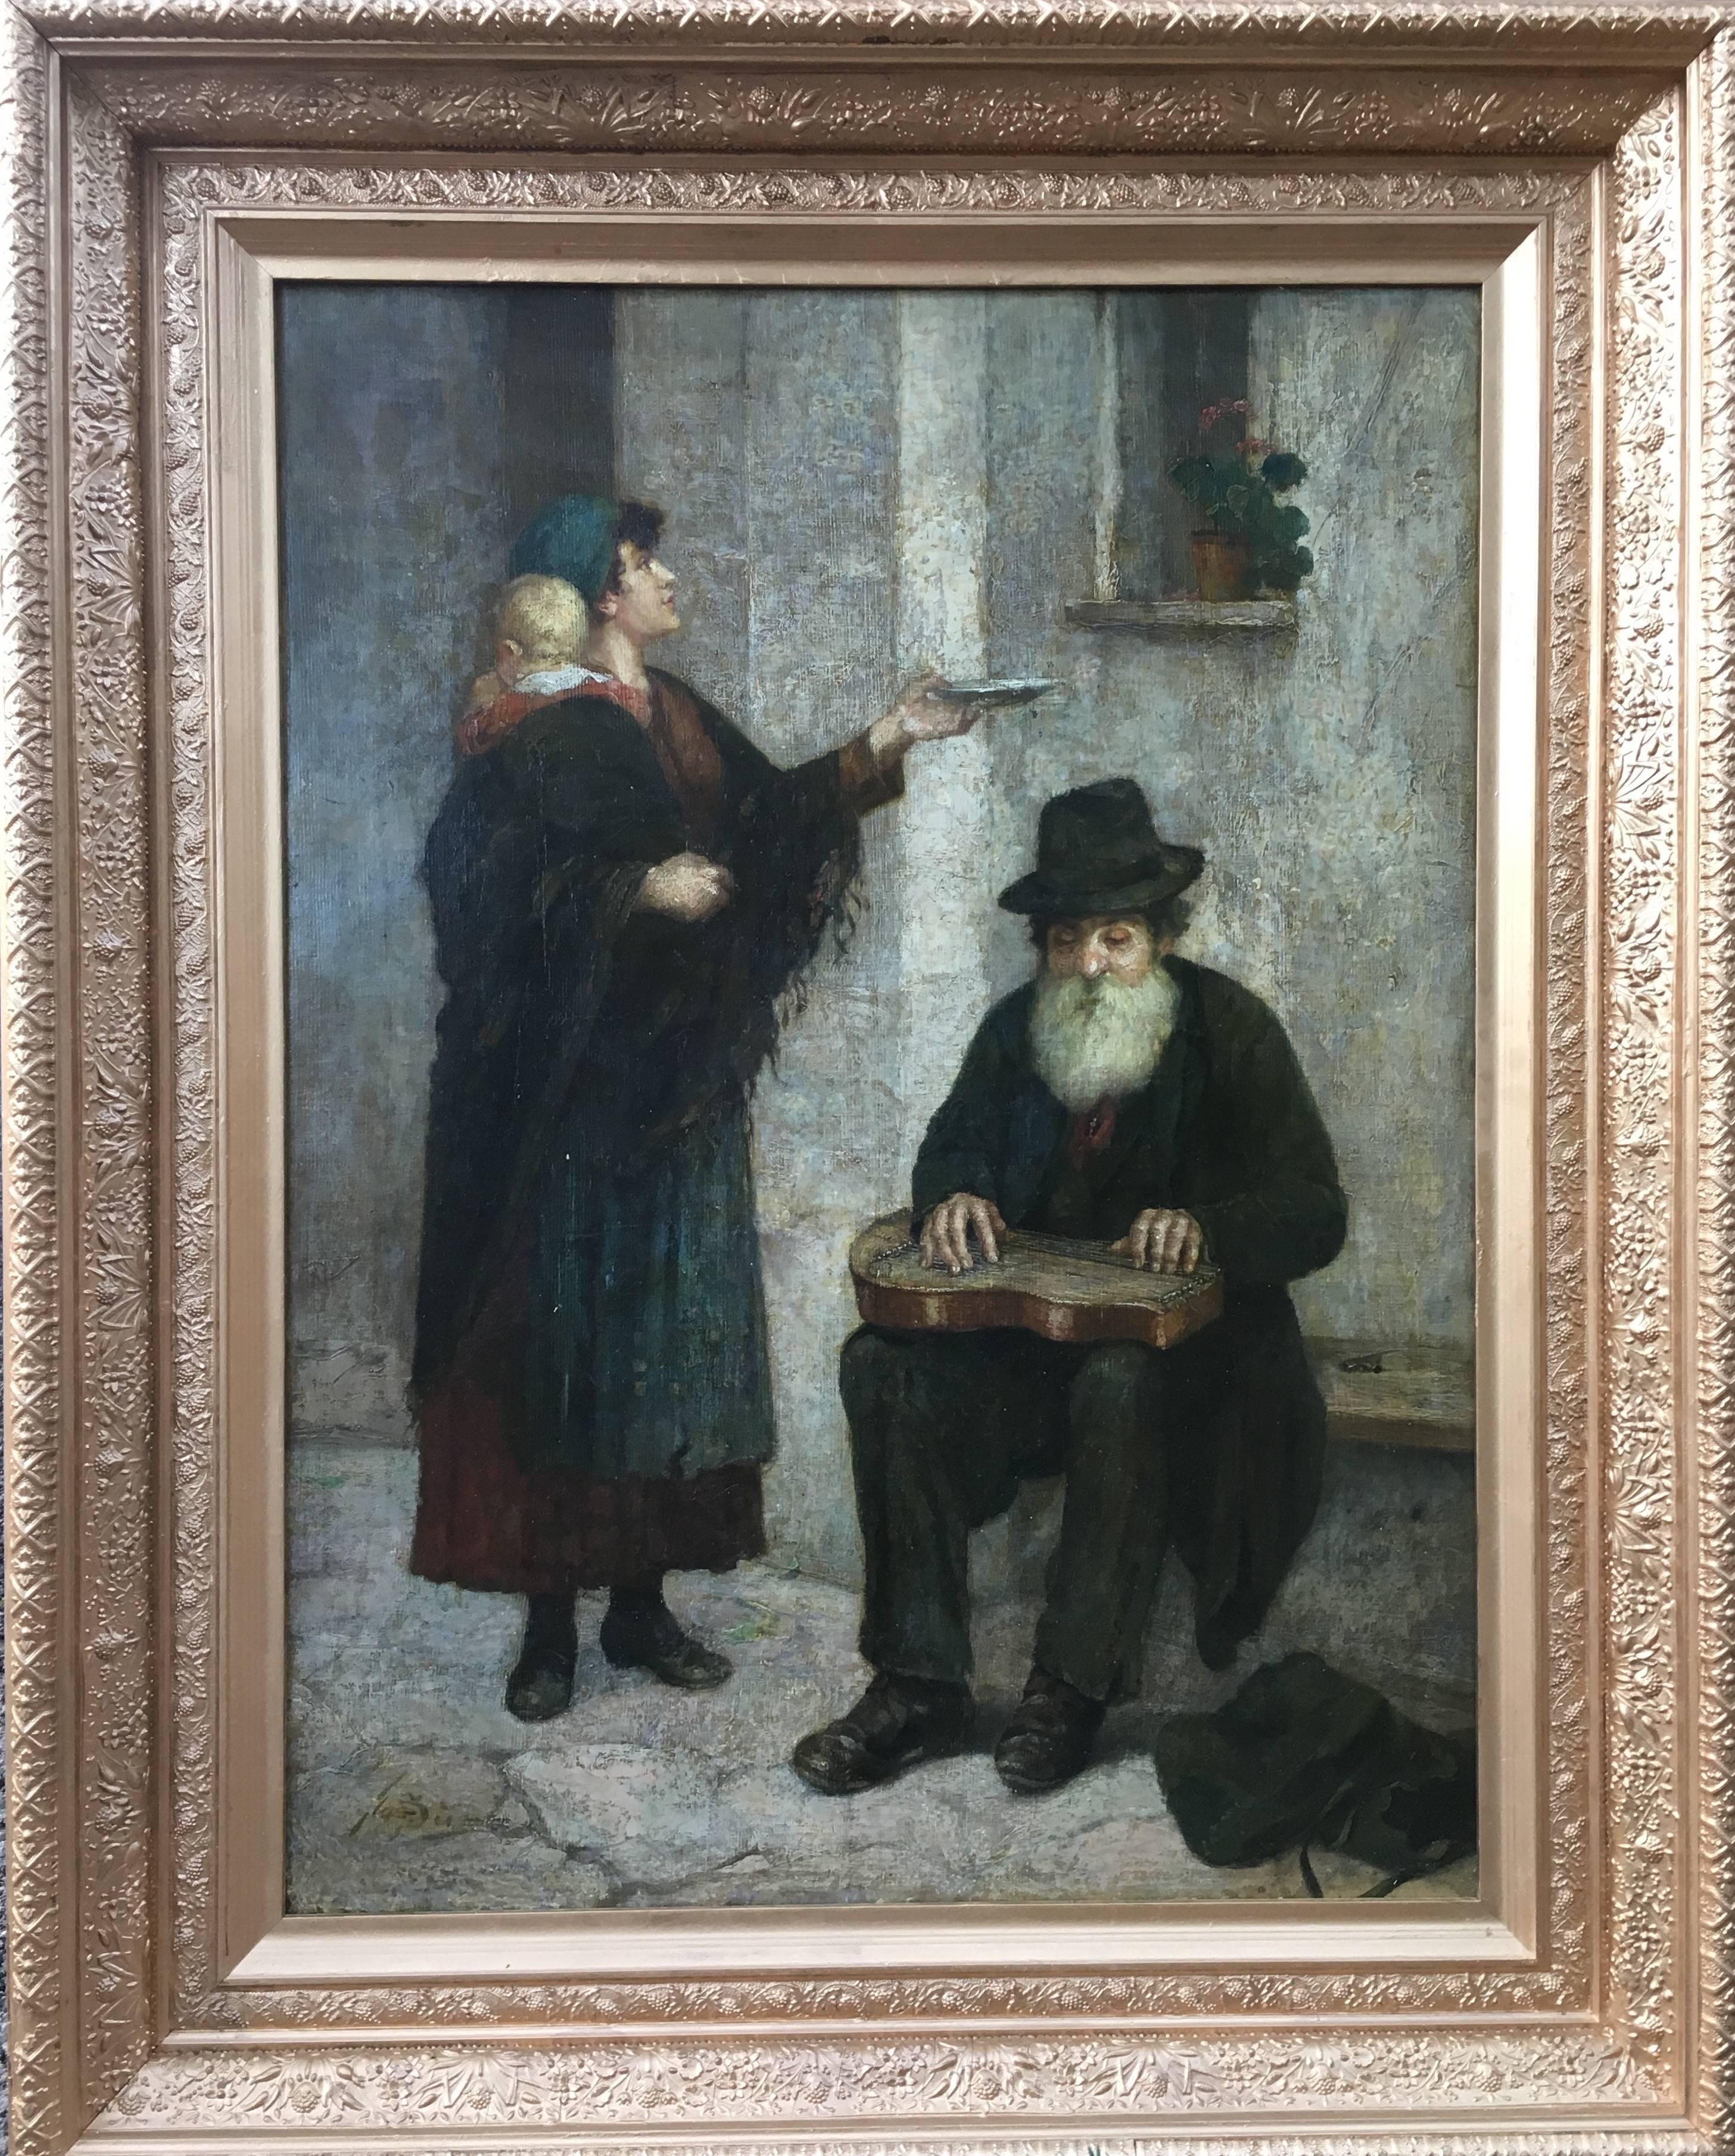 Josef Süss Figurative Painting - Woman, Child and Begging Bowl, Seated Jewish man with Instrument